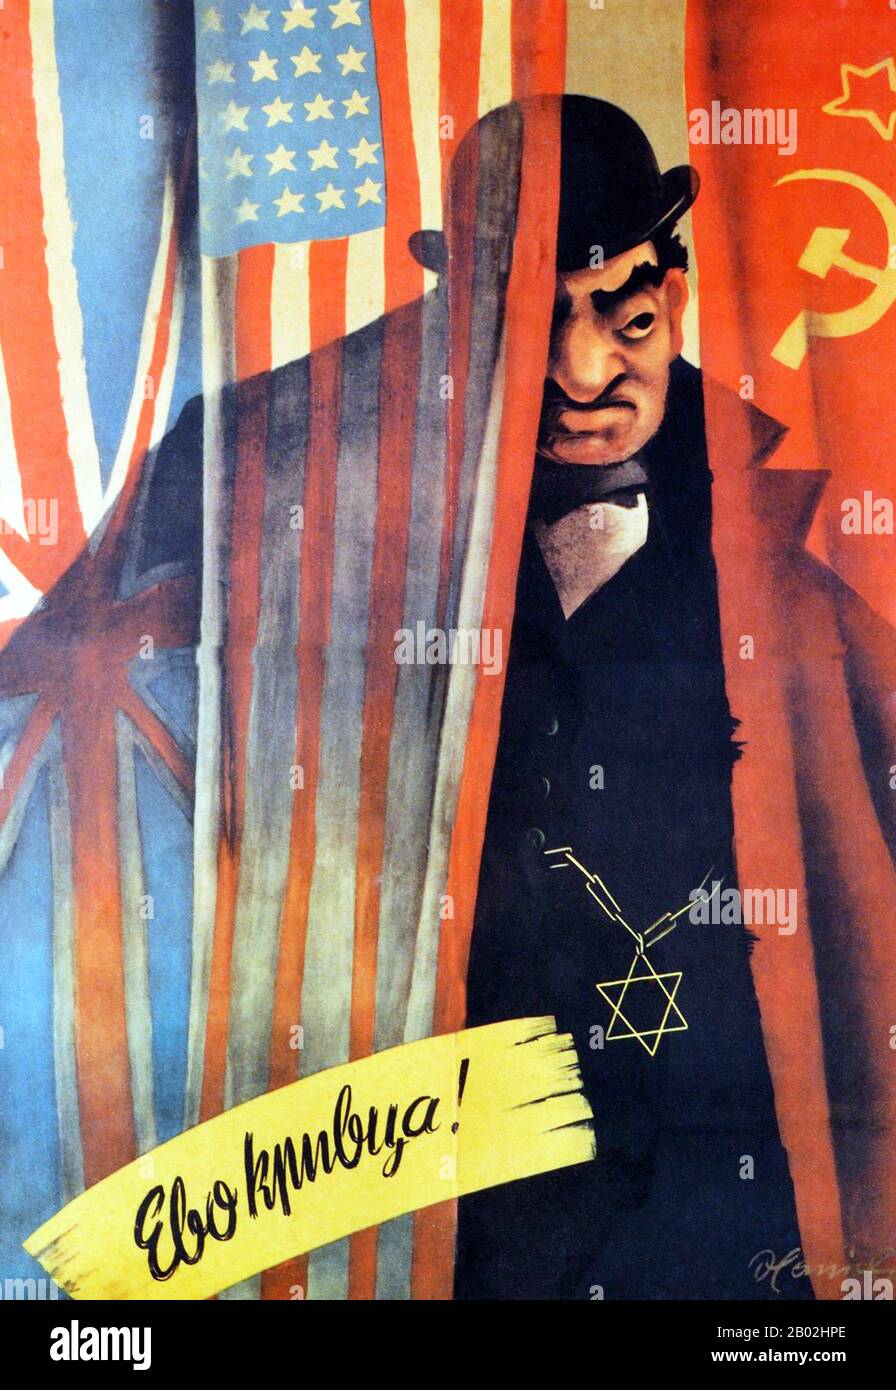 Poster with an illustration in colour of a Jew hiding behind a curtain with the flags of USSR, USA and UK. On the lower part the caption 'culprit' is printed in Serbian.  Possibly produced by Chetnik collaborators with the Nazi forces occupying the former Yugoslavia between 1941 and 1945. Stock Photo